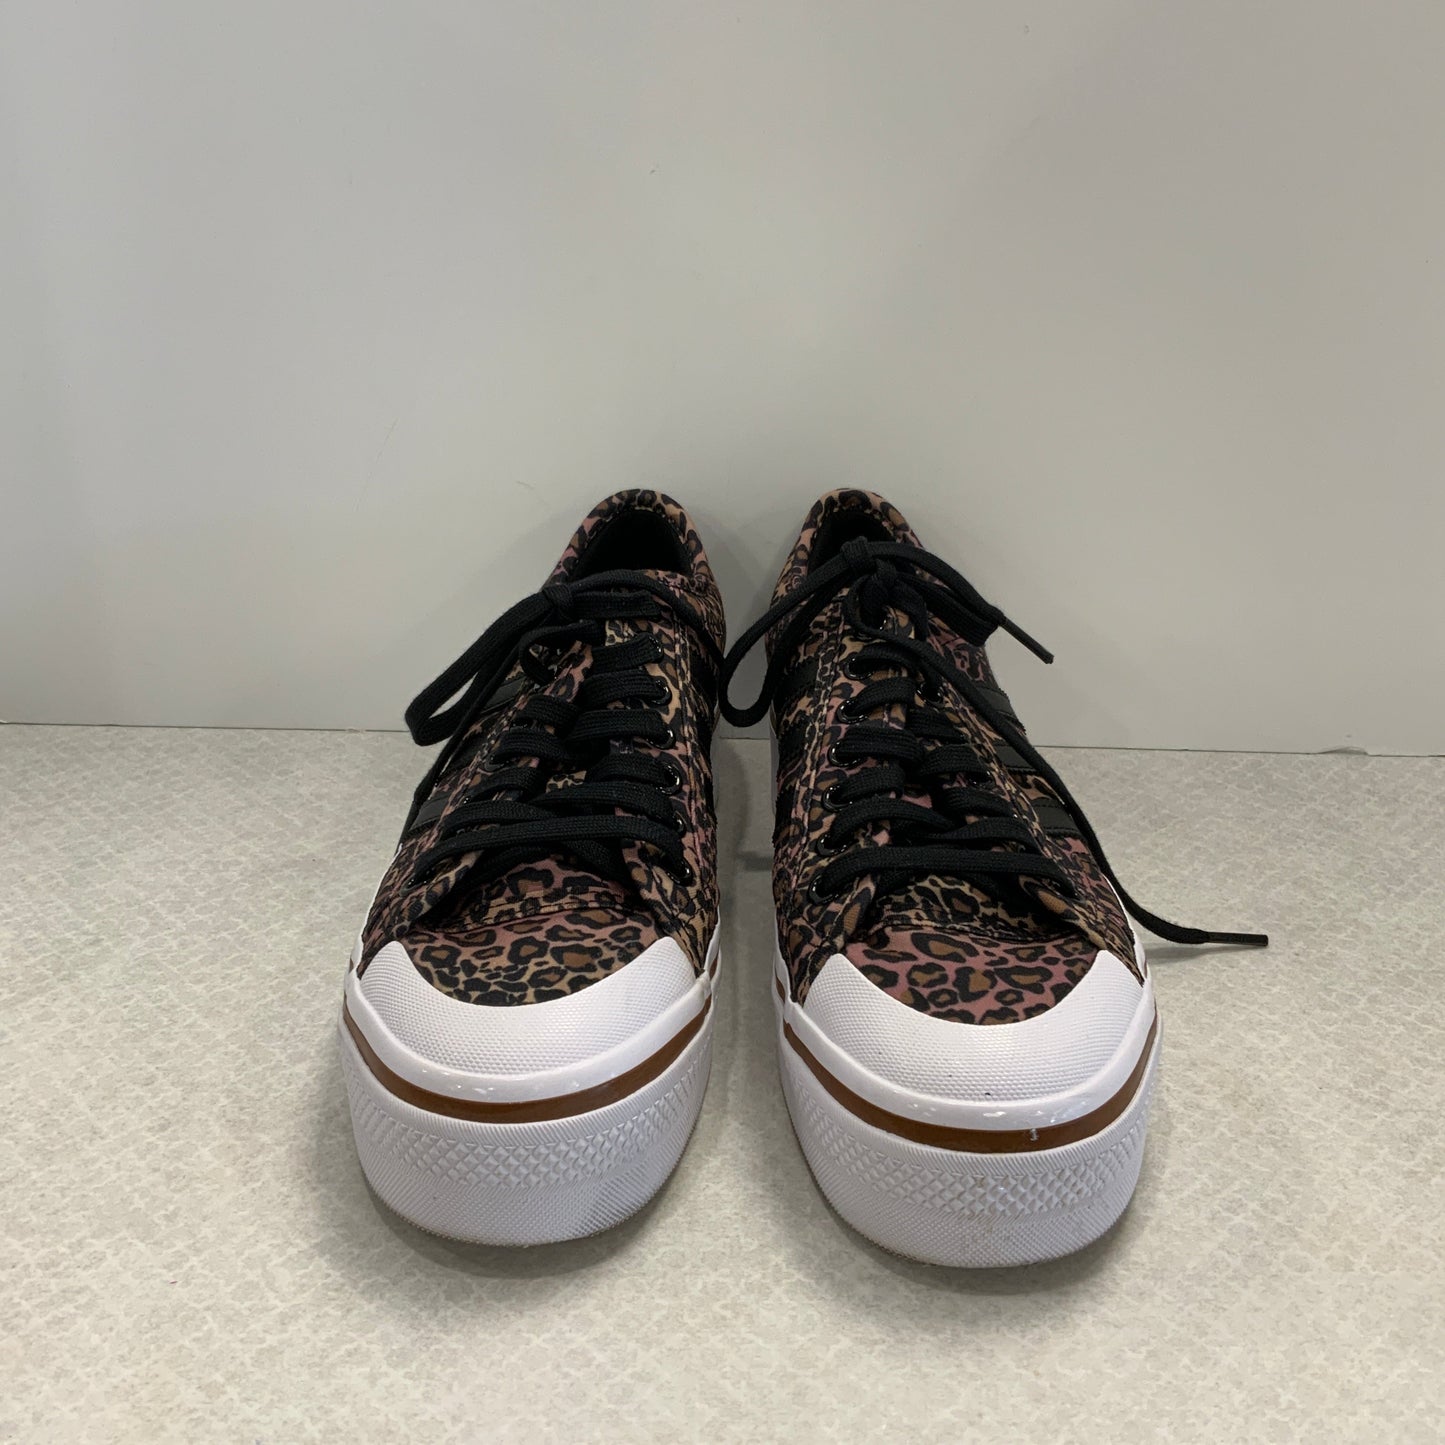 Animal Print Shoes Sneakers Adidas, Size 10